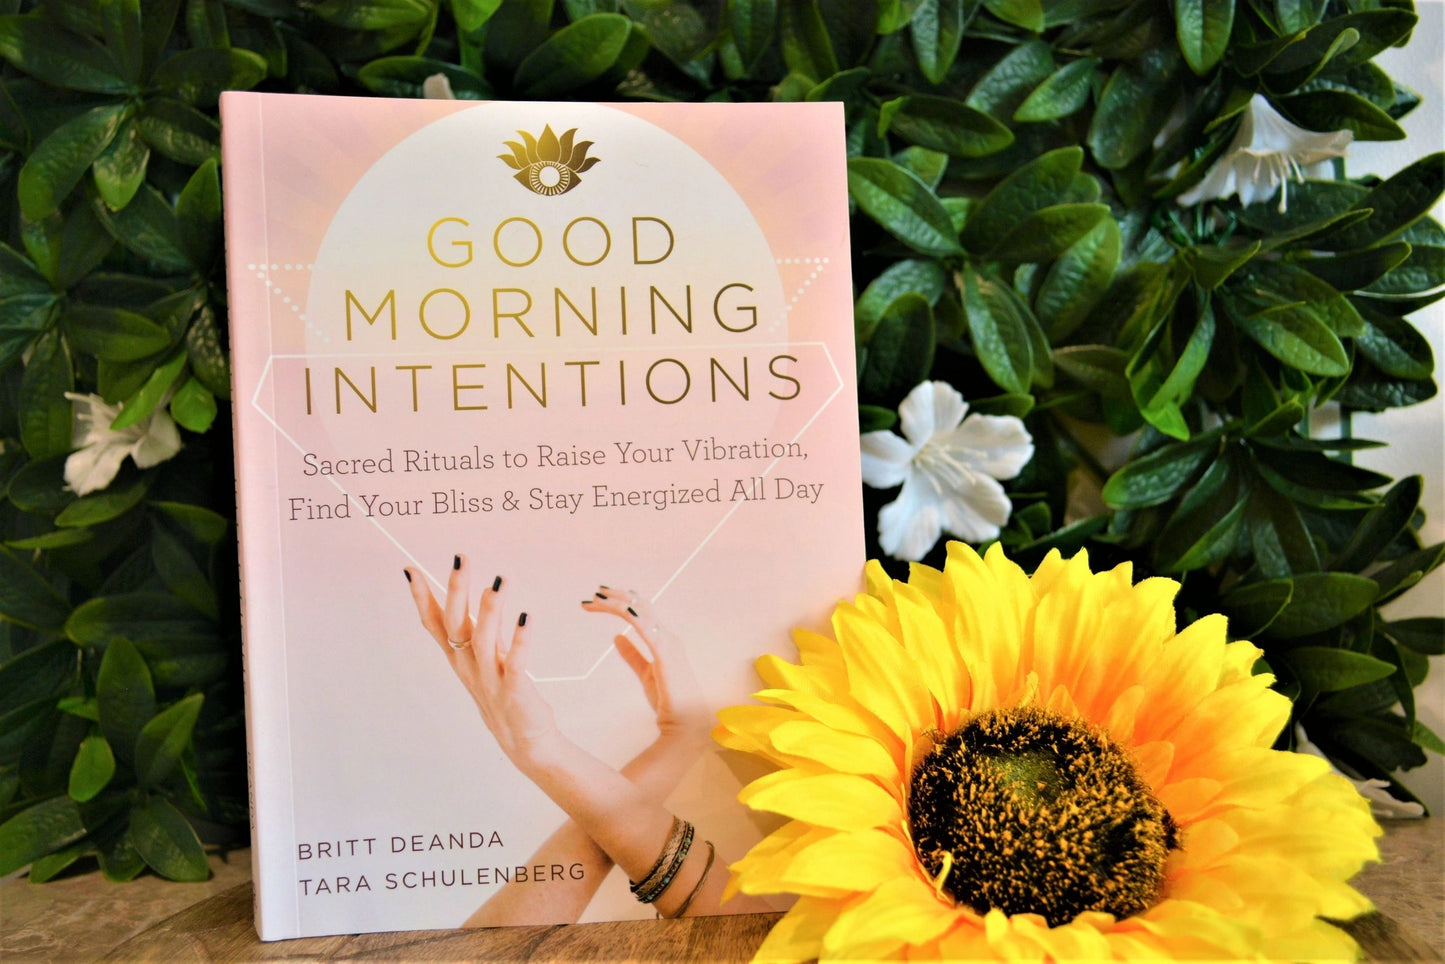 Good Morning Intentions - Sacred Rituals to Raise Your Vibration, Find Your Bliss, and Stay Energized All Day